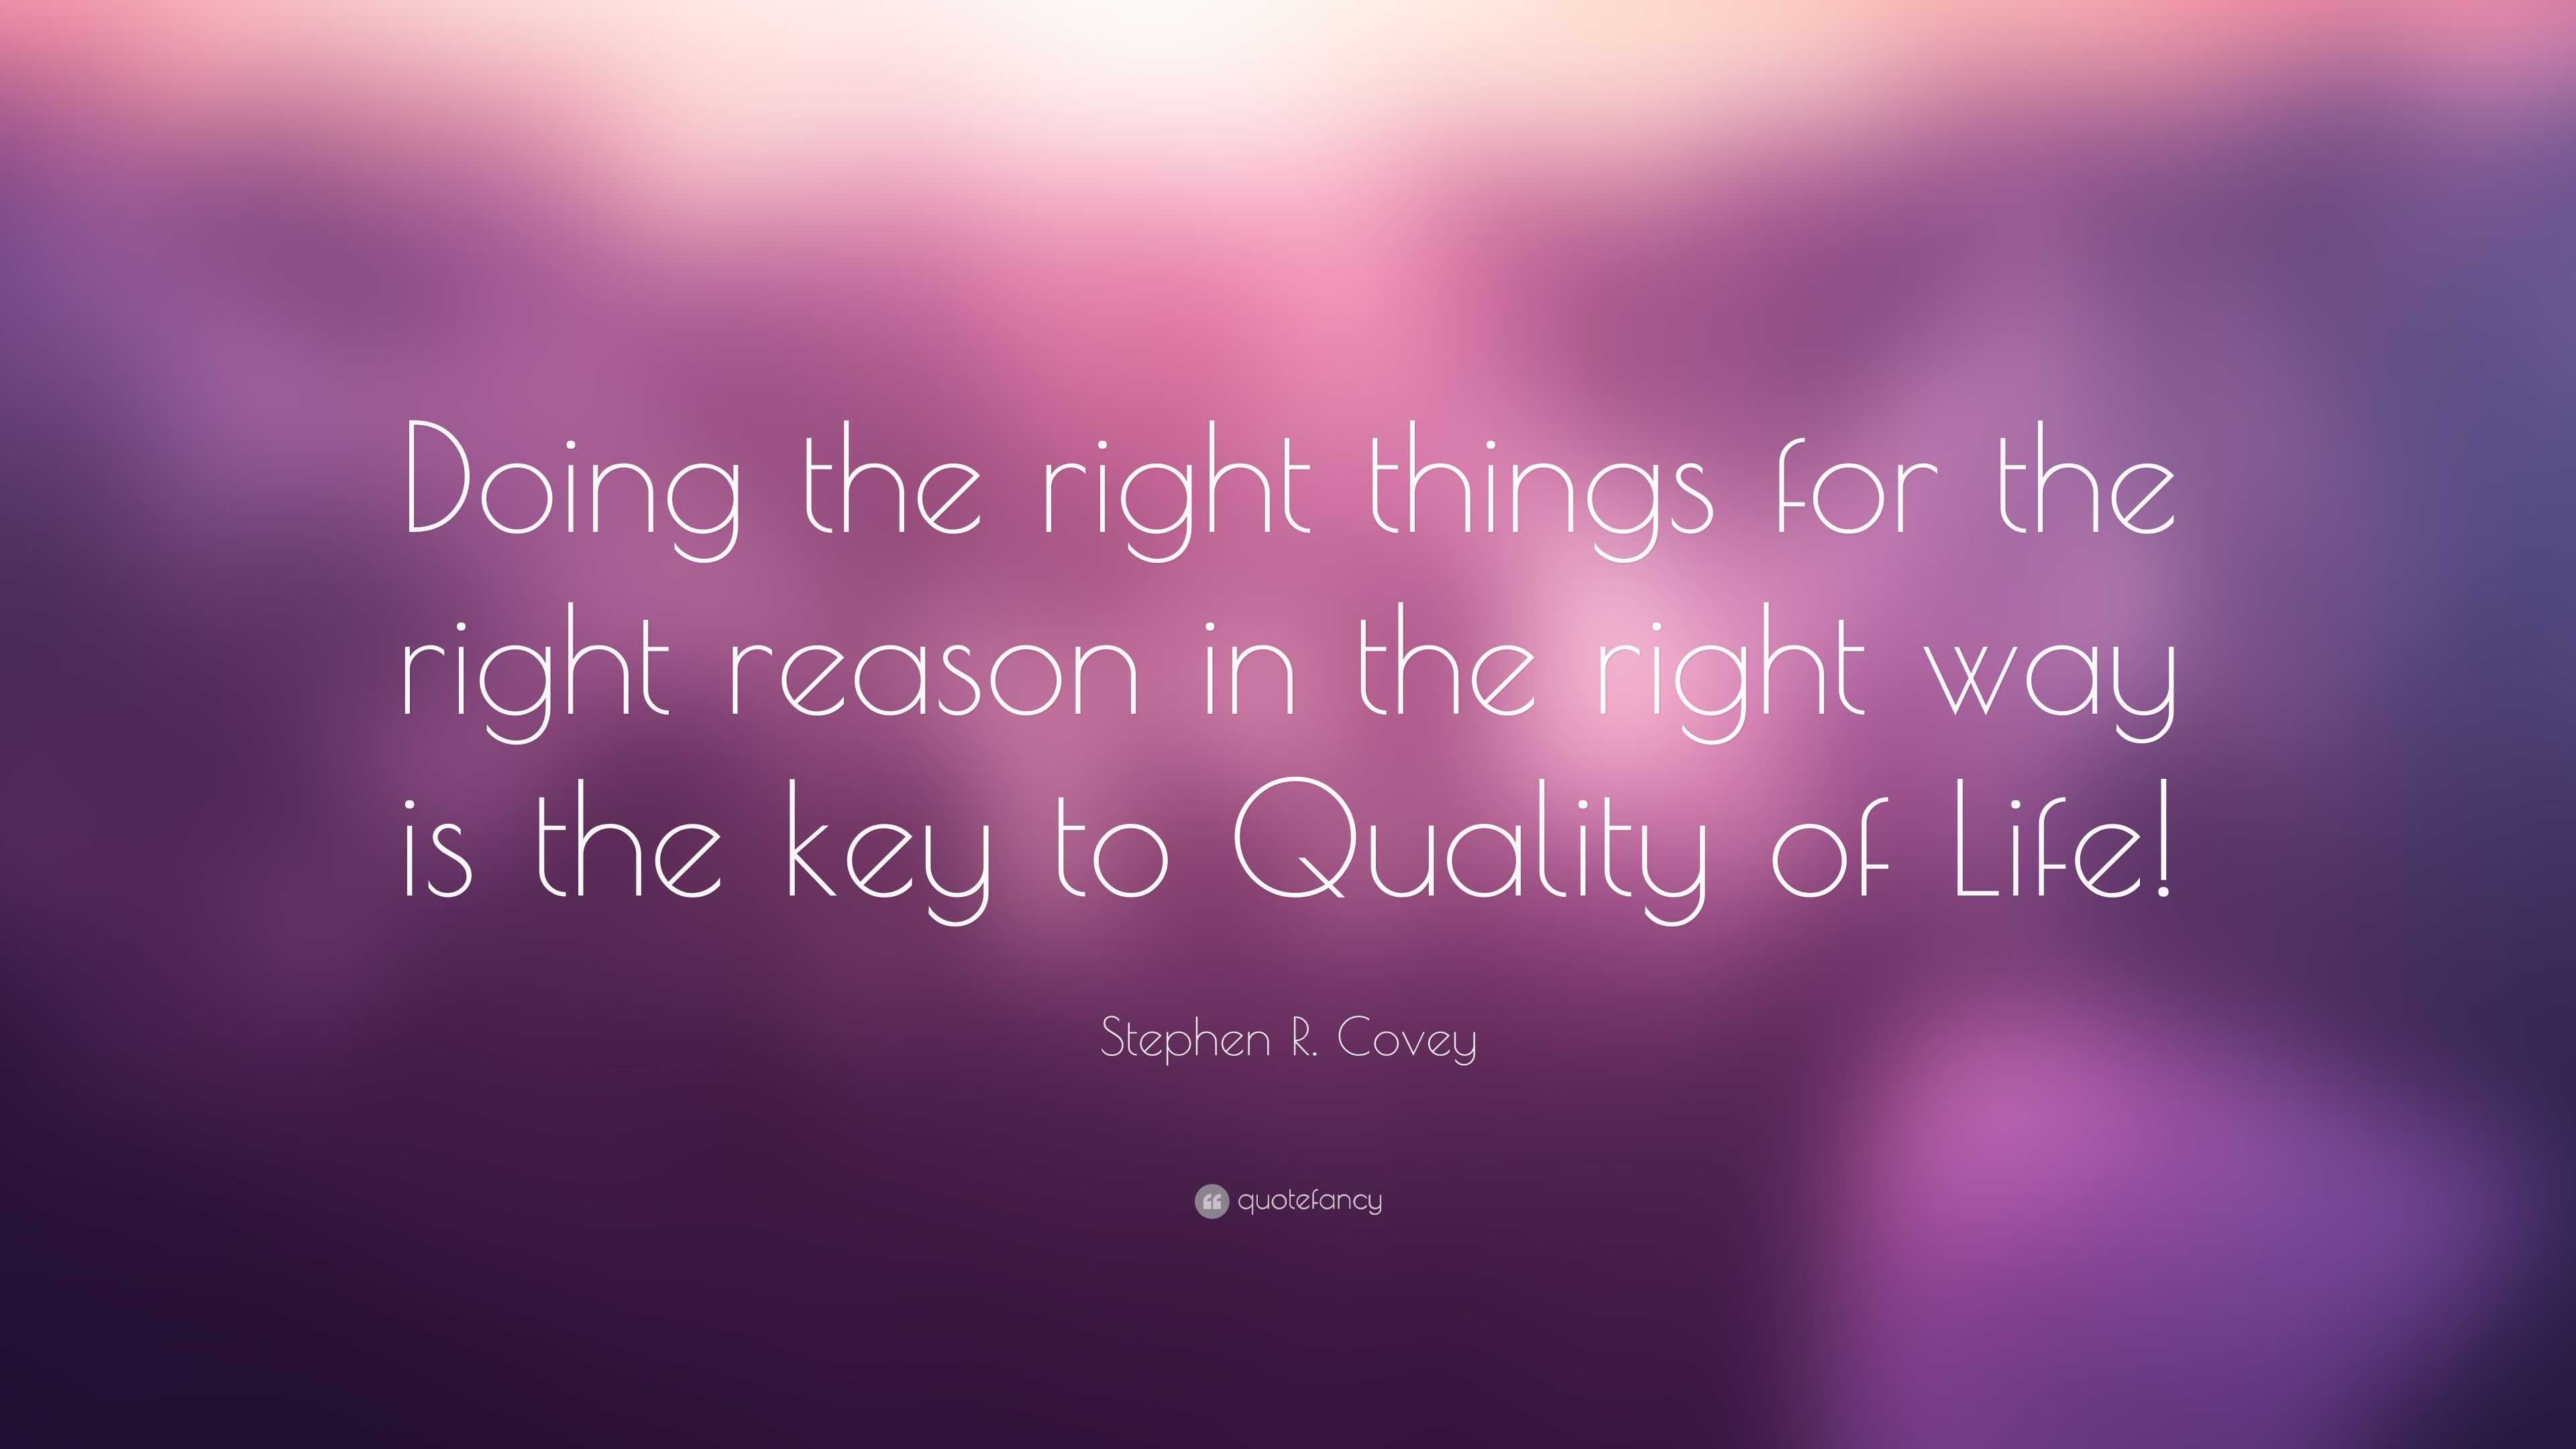 Stephen R. Covey Quote “Doing the right things for the